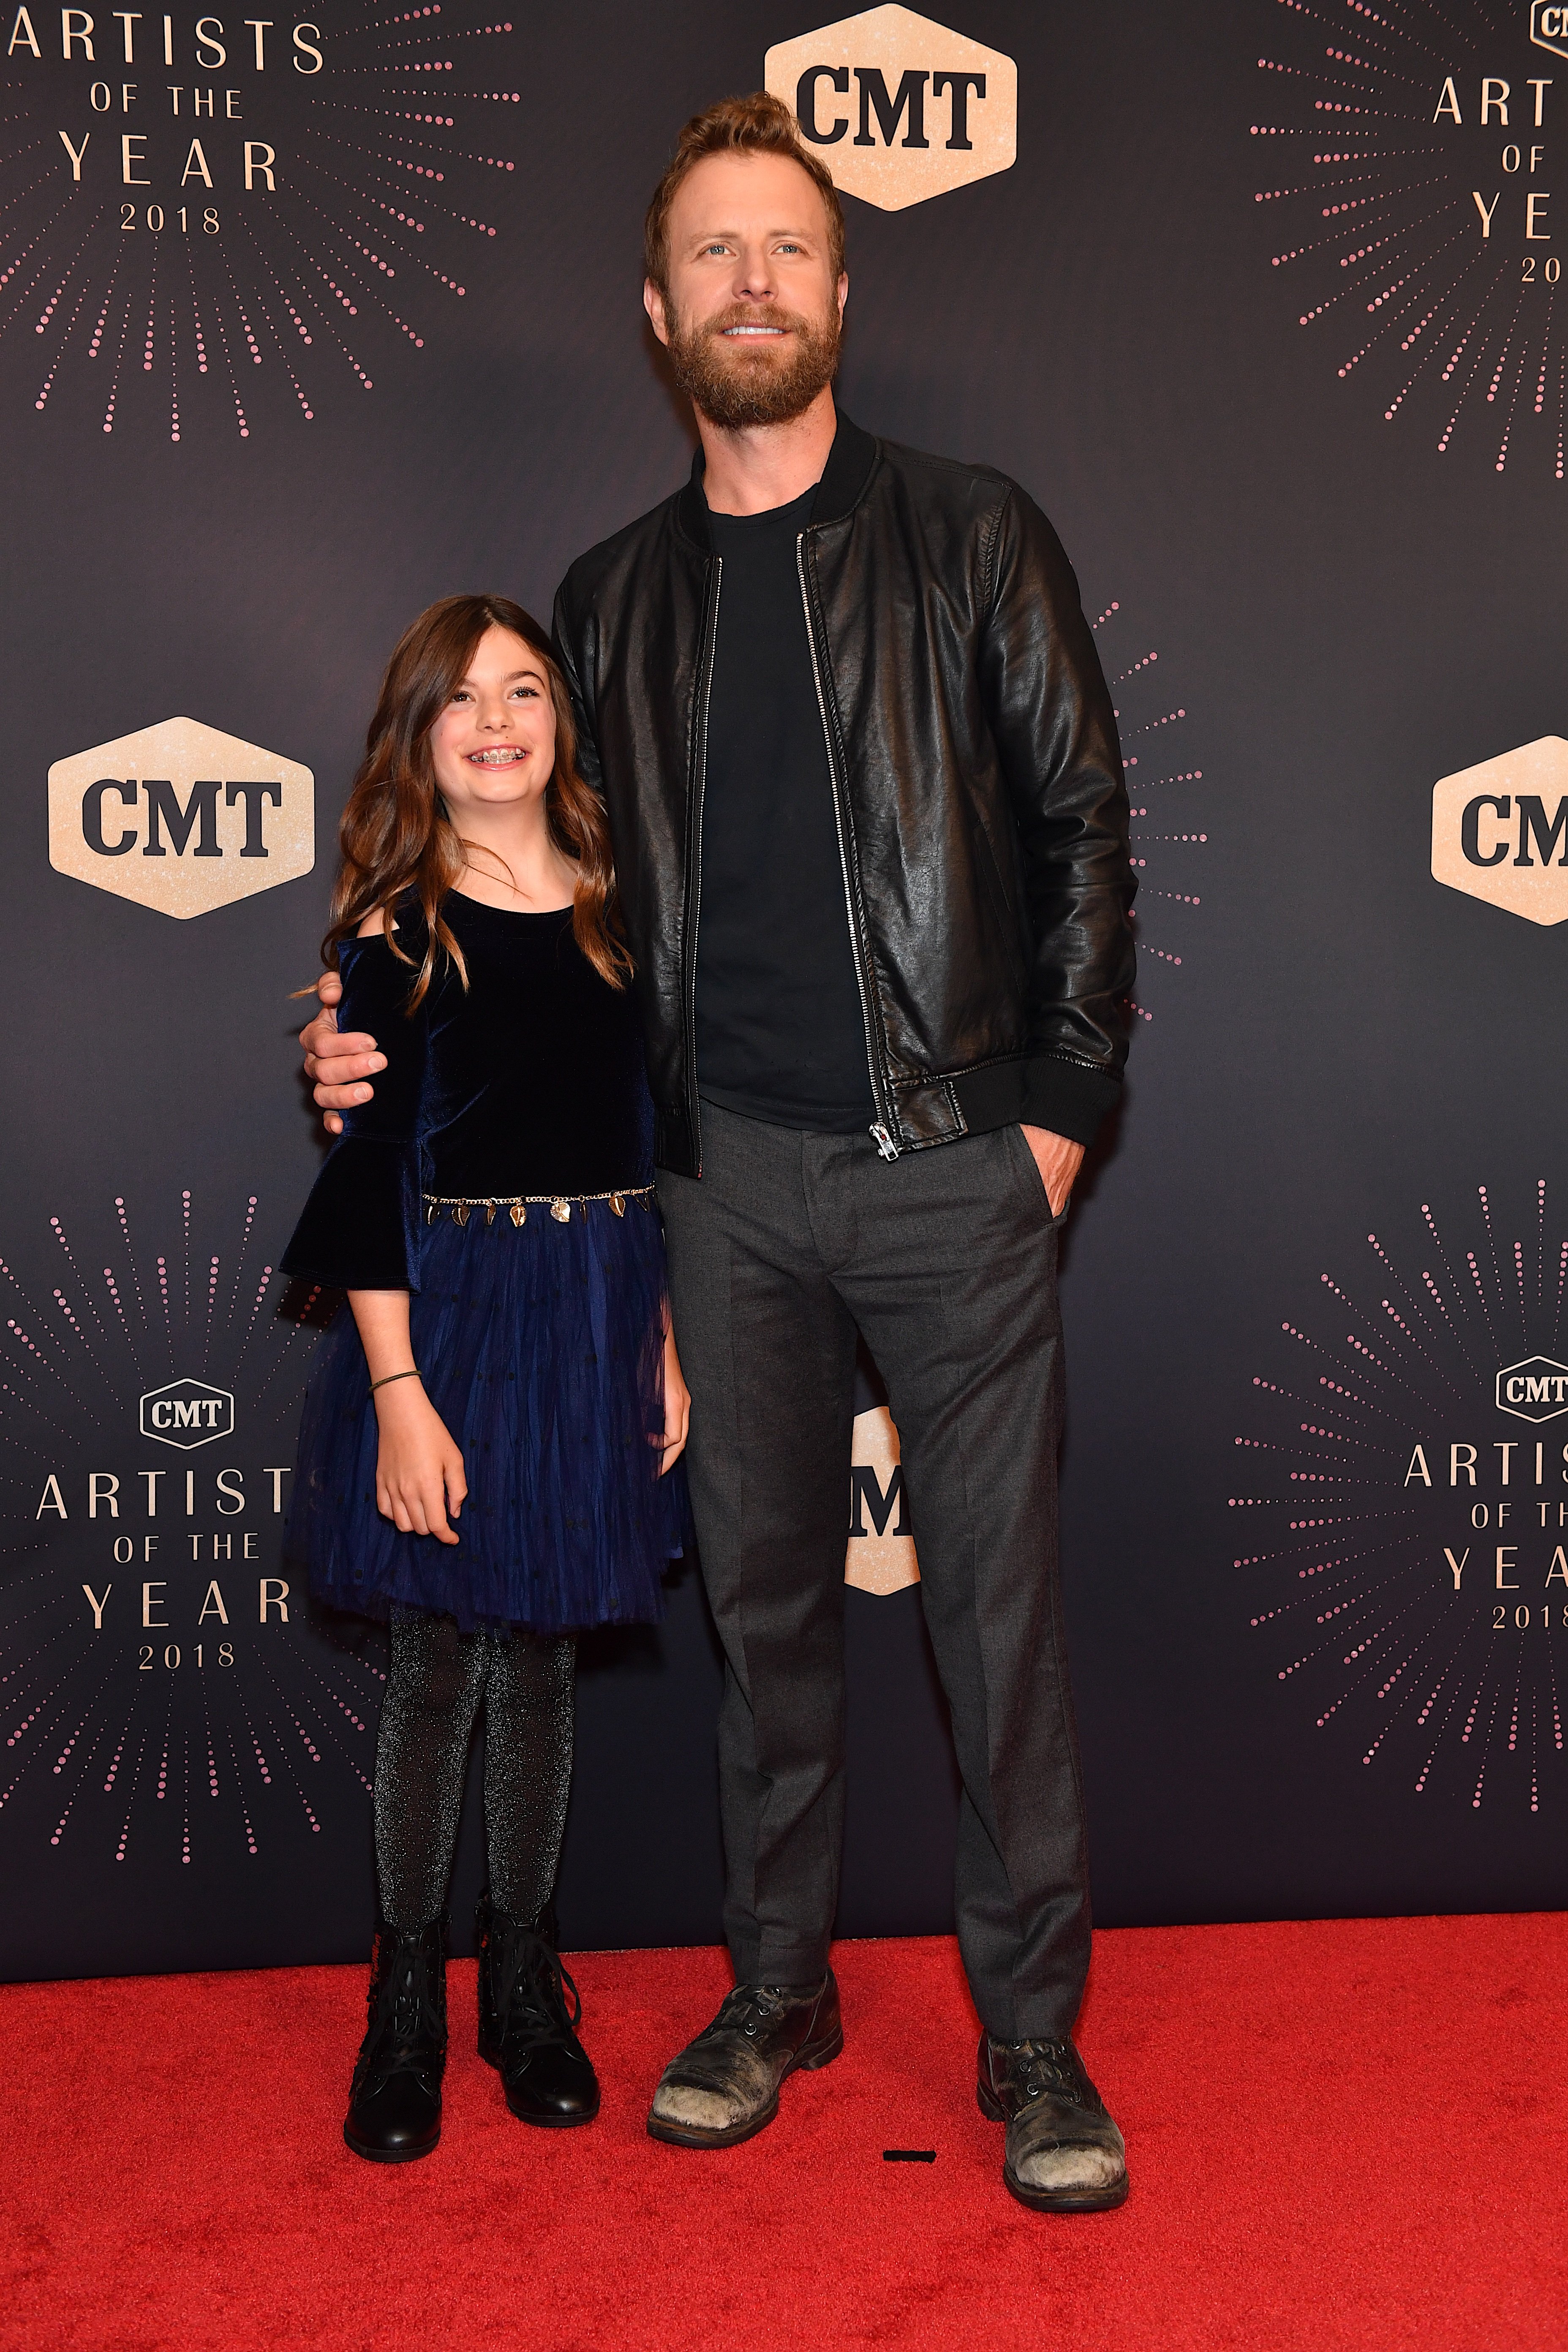 Dierks Bentley and his daughter arrive at the 2018 CMT Artists of the Year at Schermerhorn Symphony Center on October 17, 2018, in Nashville, Tennessee. | Source: Getty Images